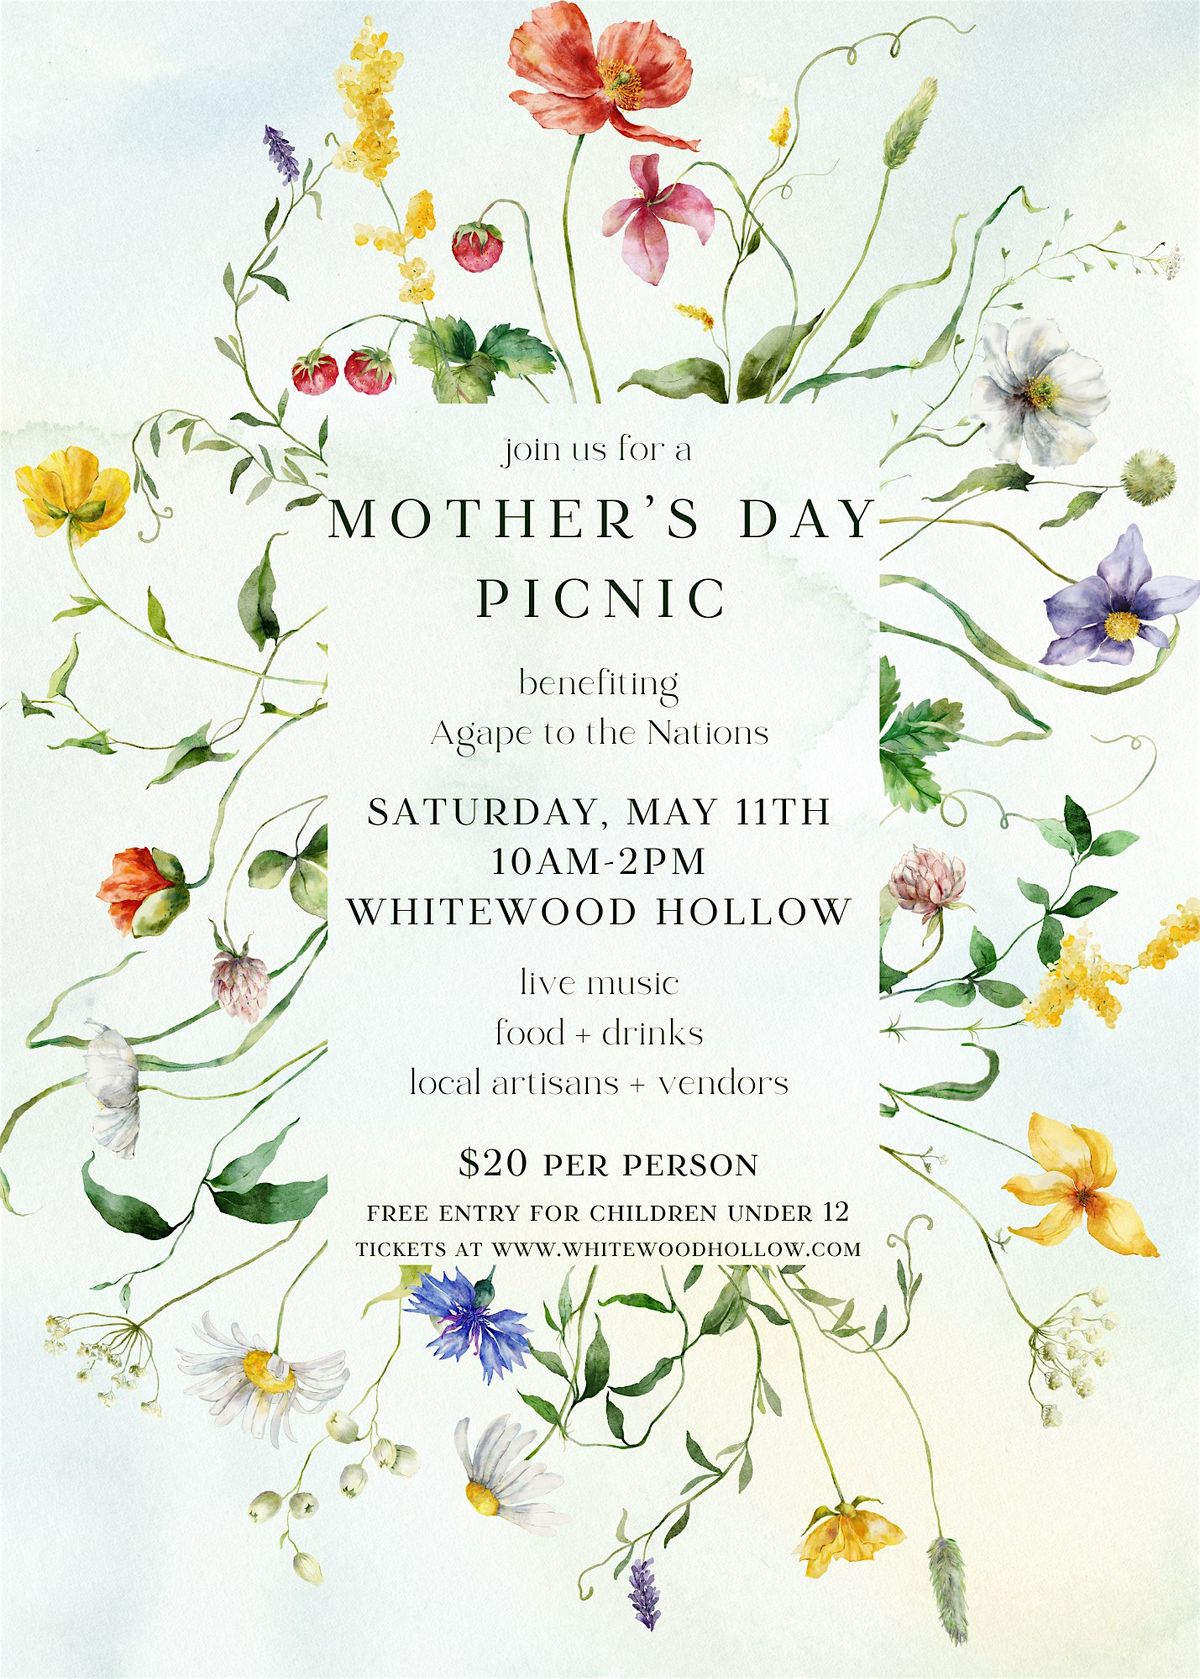 Mother's Day Picnic